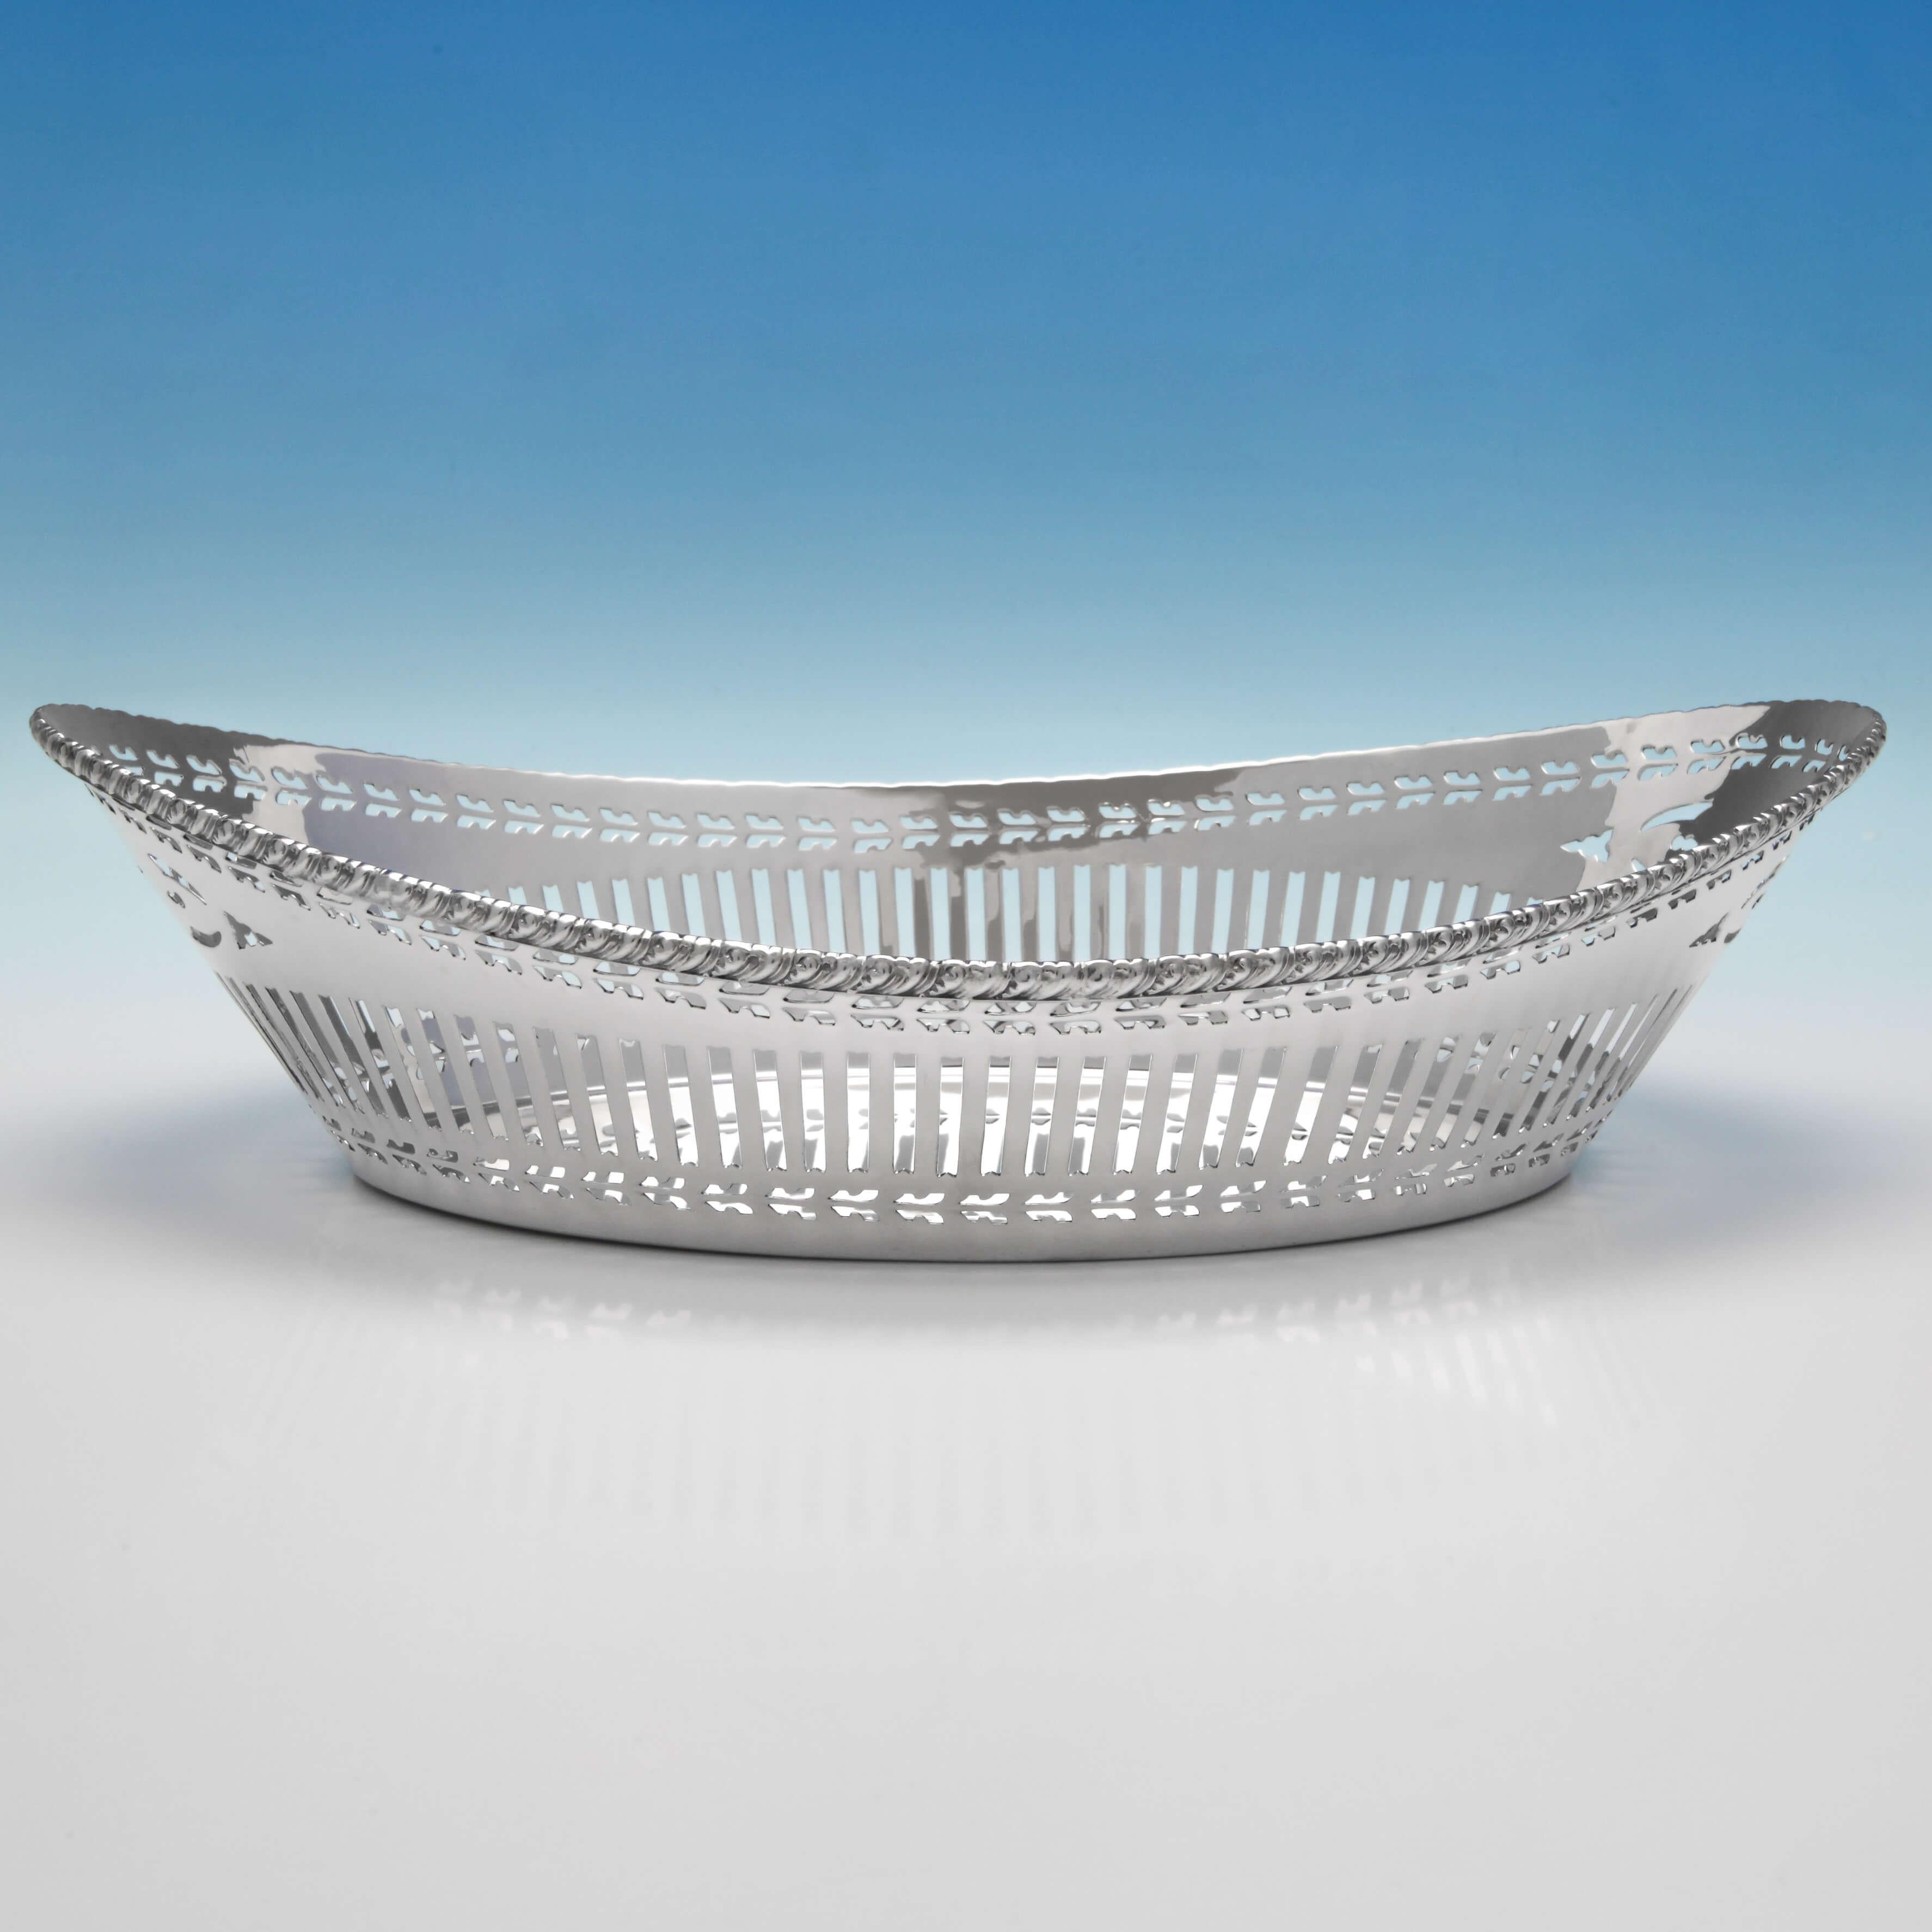 Hallmarked in Chester in 1920 by Barker Brothers Ltd., this attractive George V, sterling silver bread dish features pierced decoration to the body and an unusual gadroon and acanthus border. The dish measures: 3